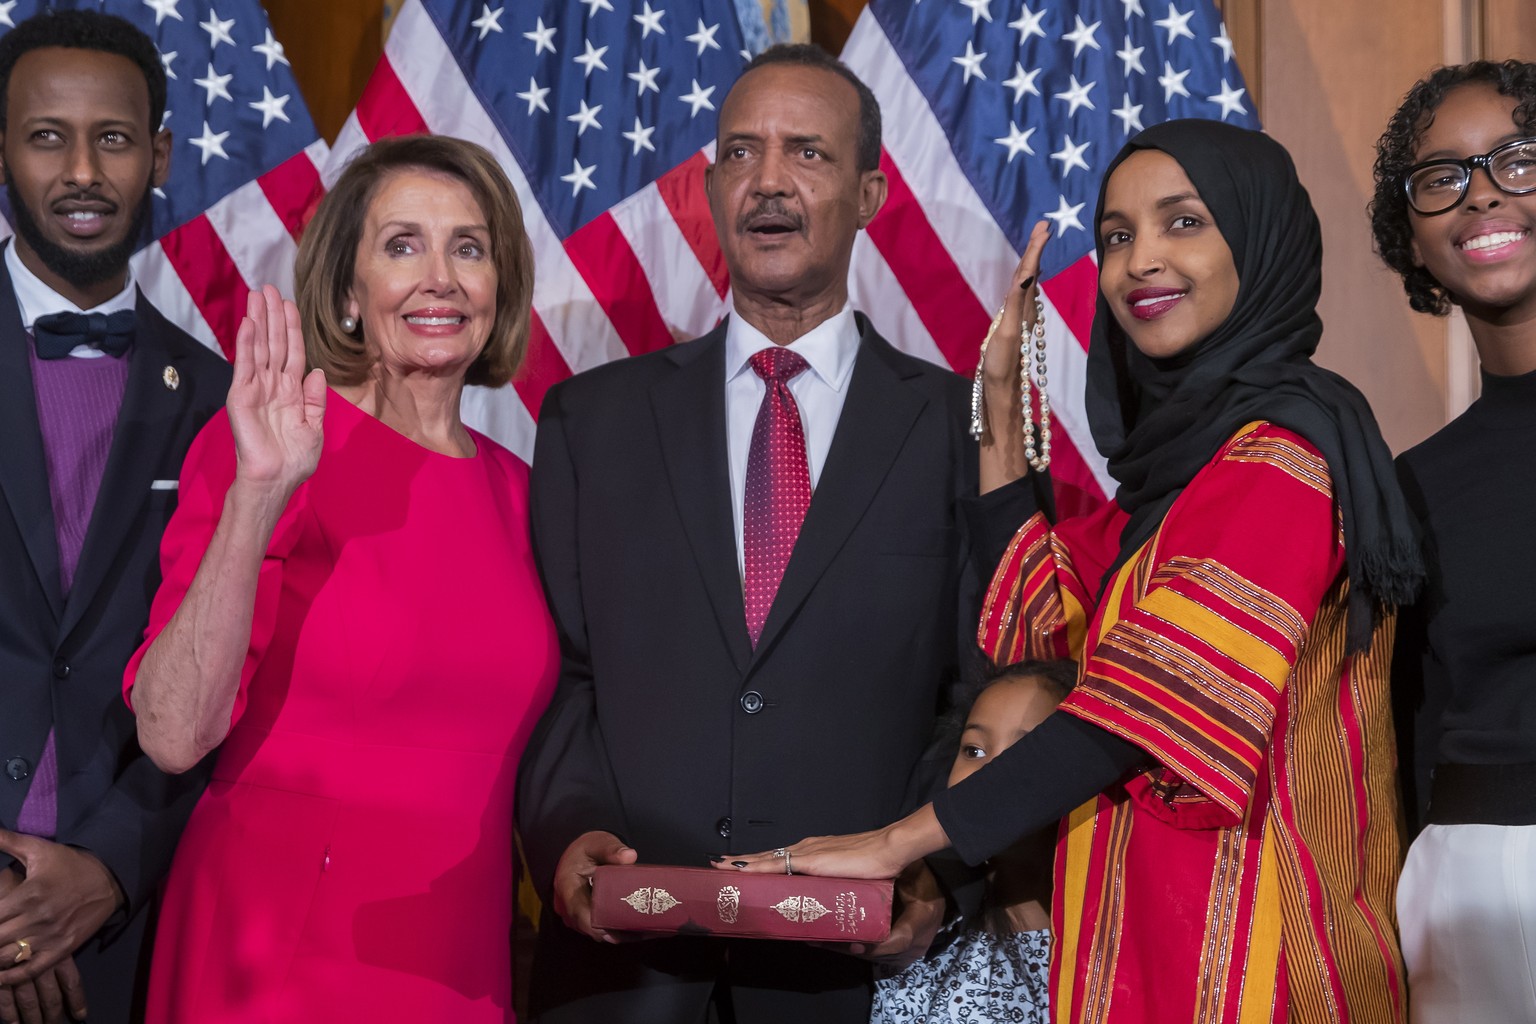 epa07260651 Democratic Representative from Minnesota Ilhan Omar (2-R), uses the Koran of her late grandfather while posing with new Democratic Speaker of the House Nancy Pelosi (2-L), during the first ...